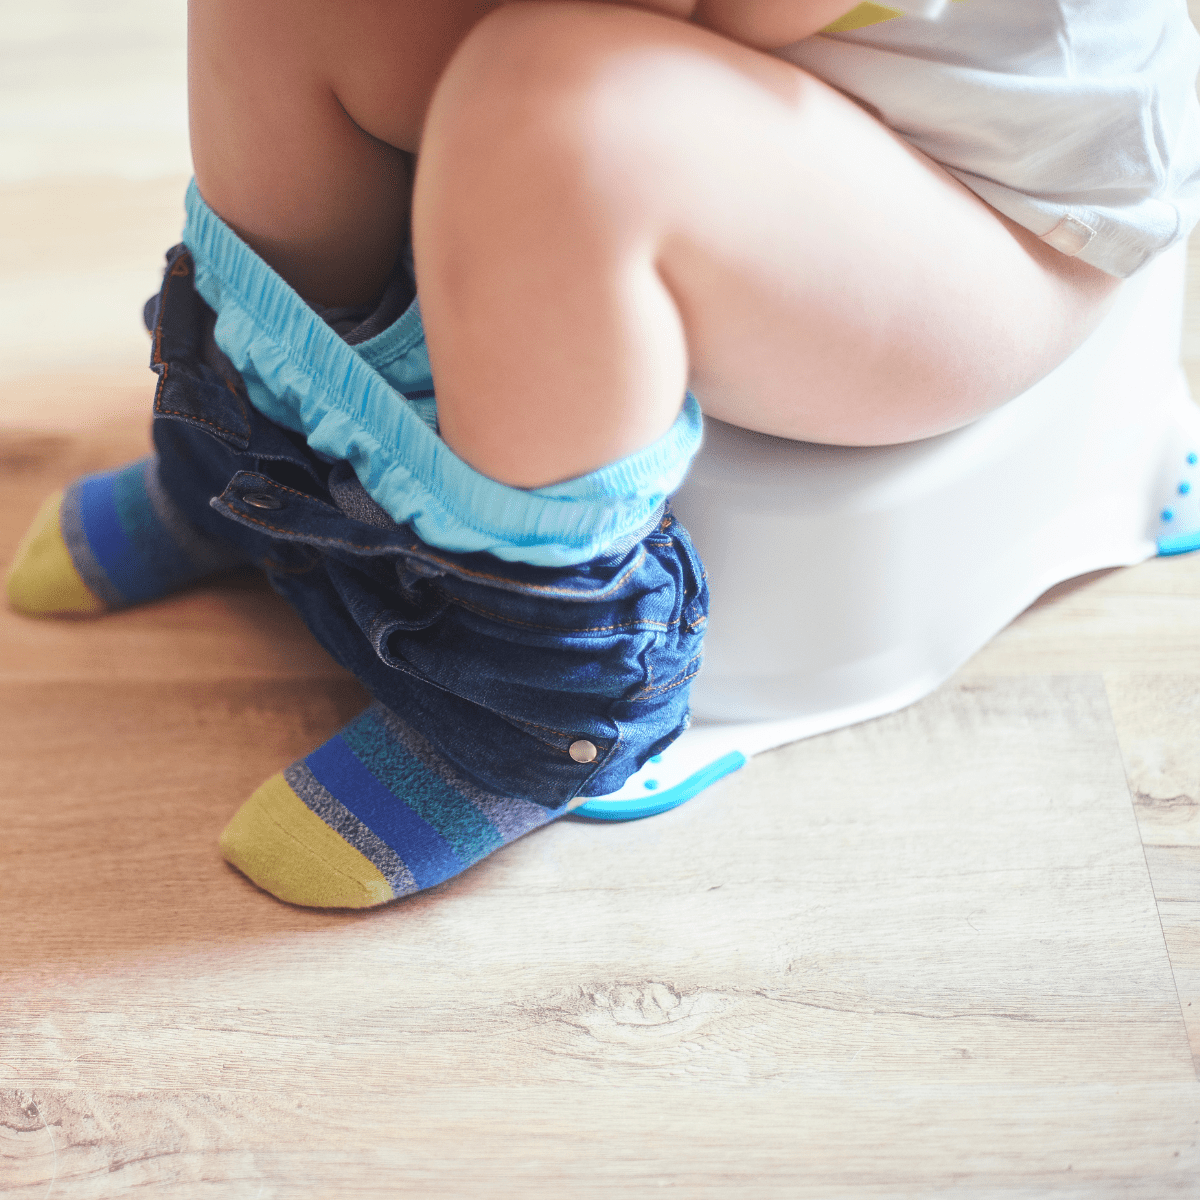 Toddler on a training toilet with pants around their ankles.